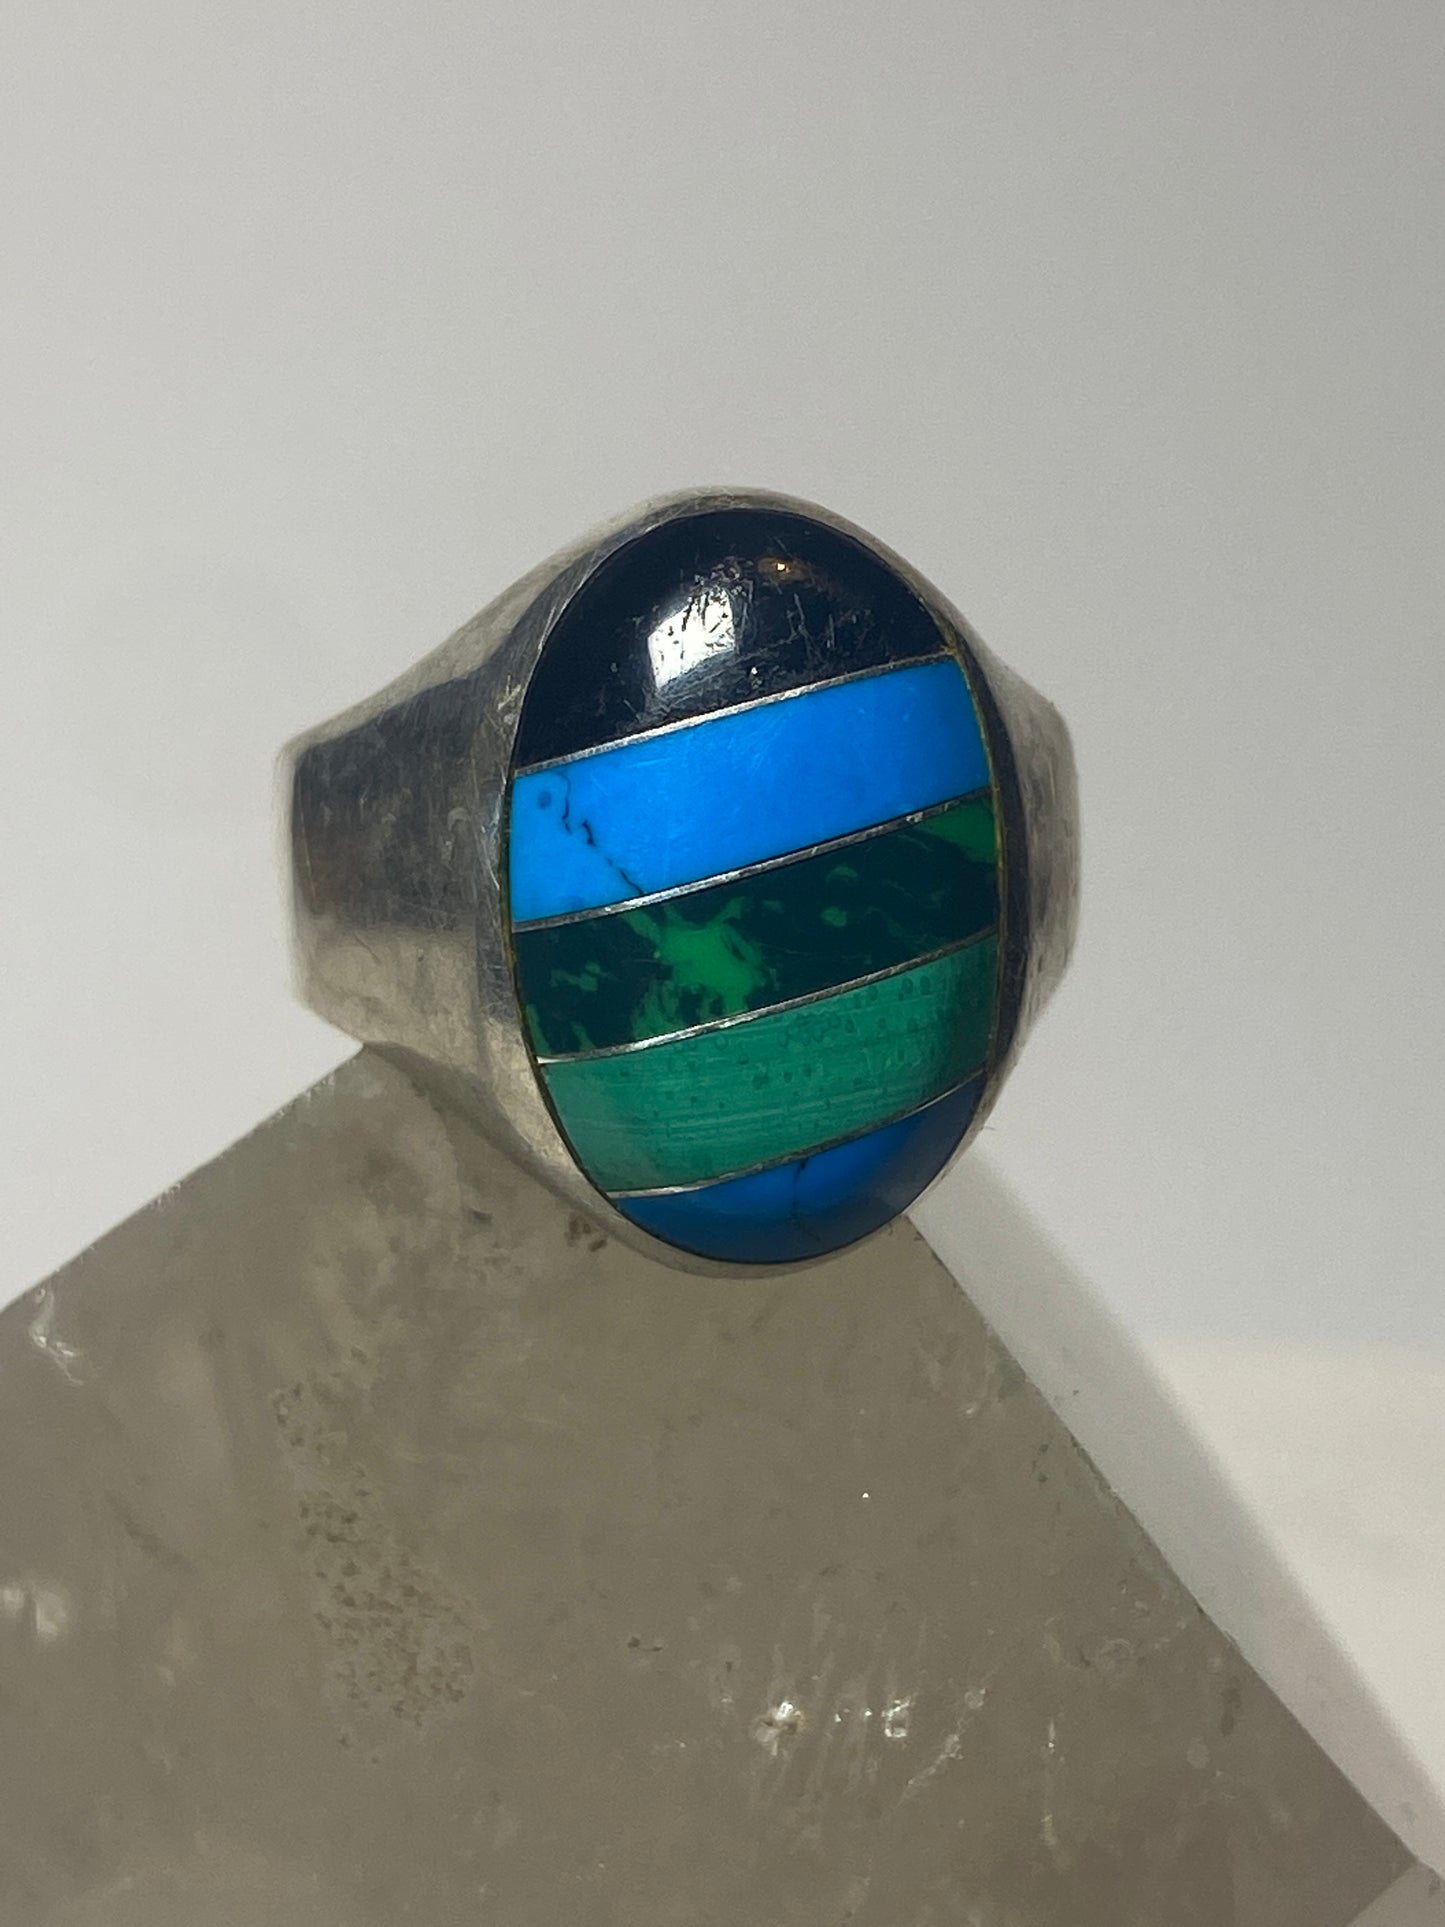 Turquoise ring Mexico Azurite Onyx southwest sterling silver women men